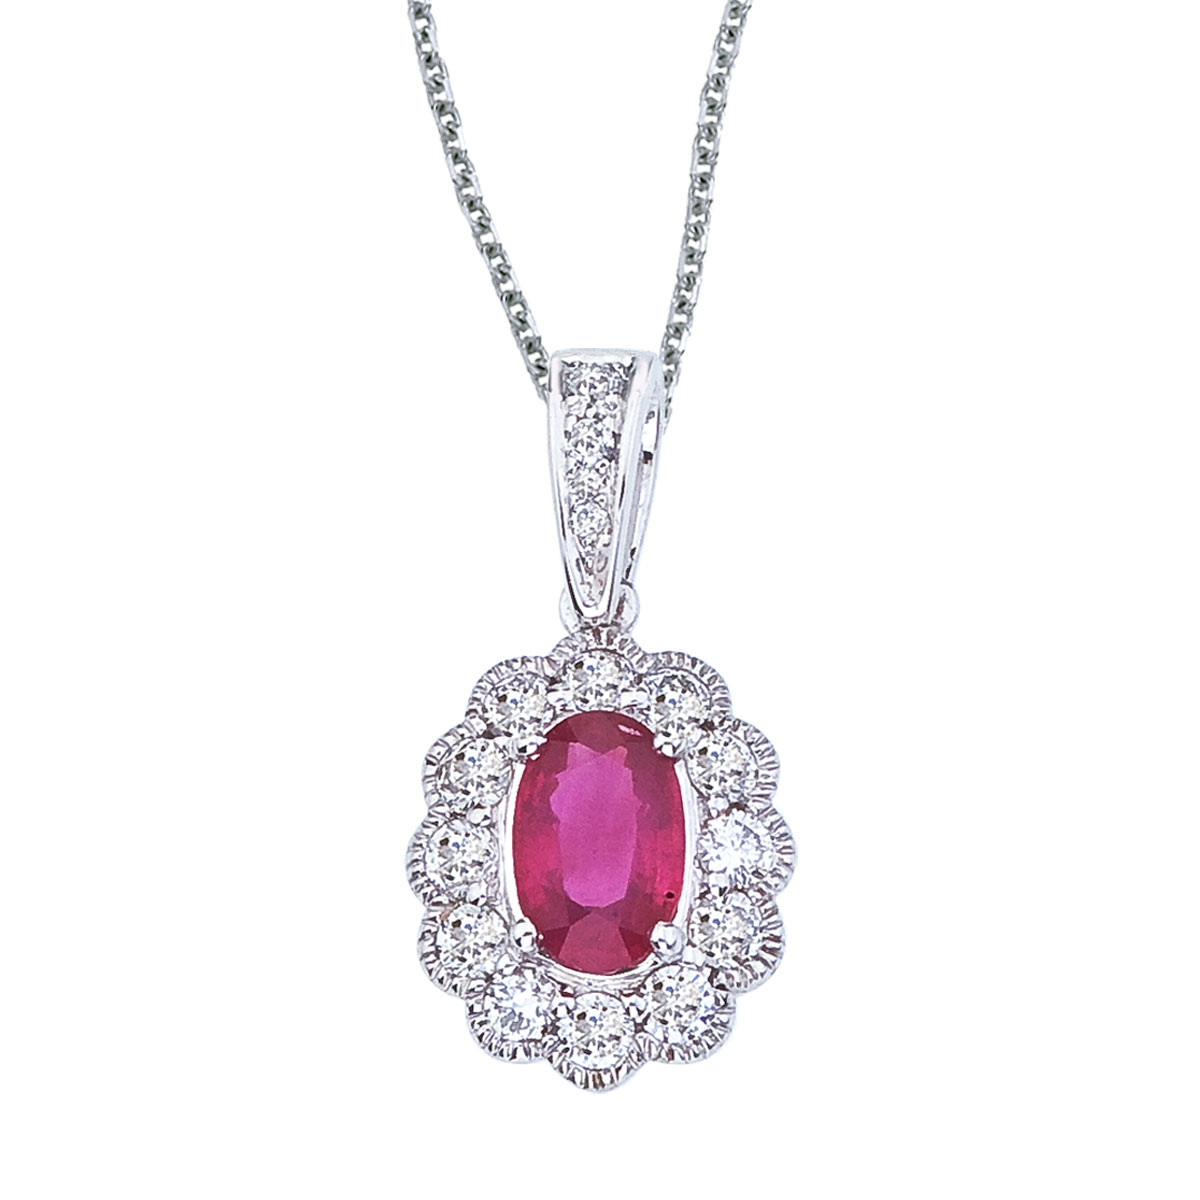 JCX2576: This beautiful 14k white gold pendant features a bright 6x4 mm ruby with .30 total ct diamonds.